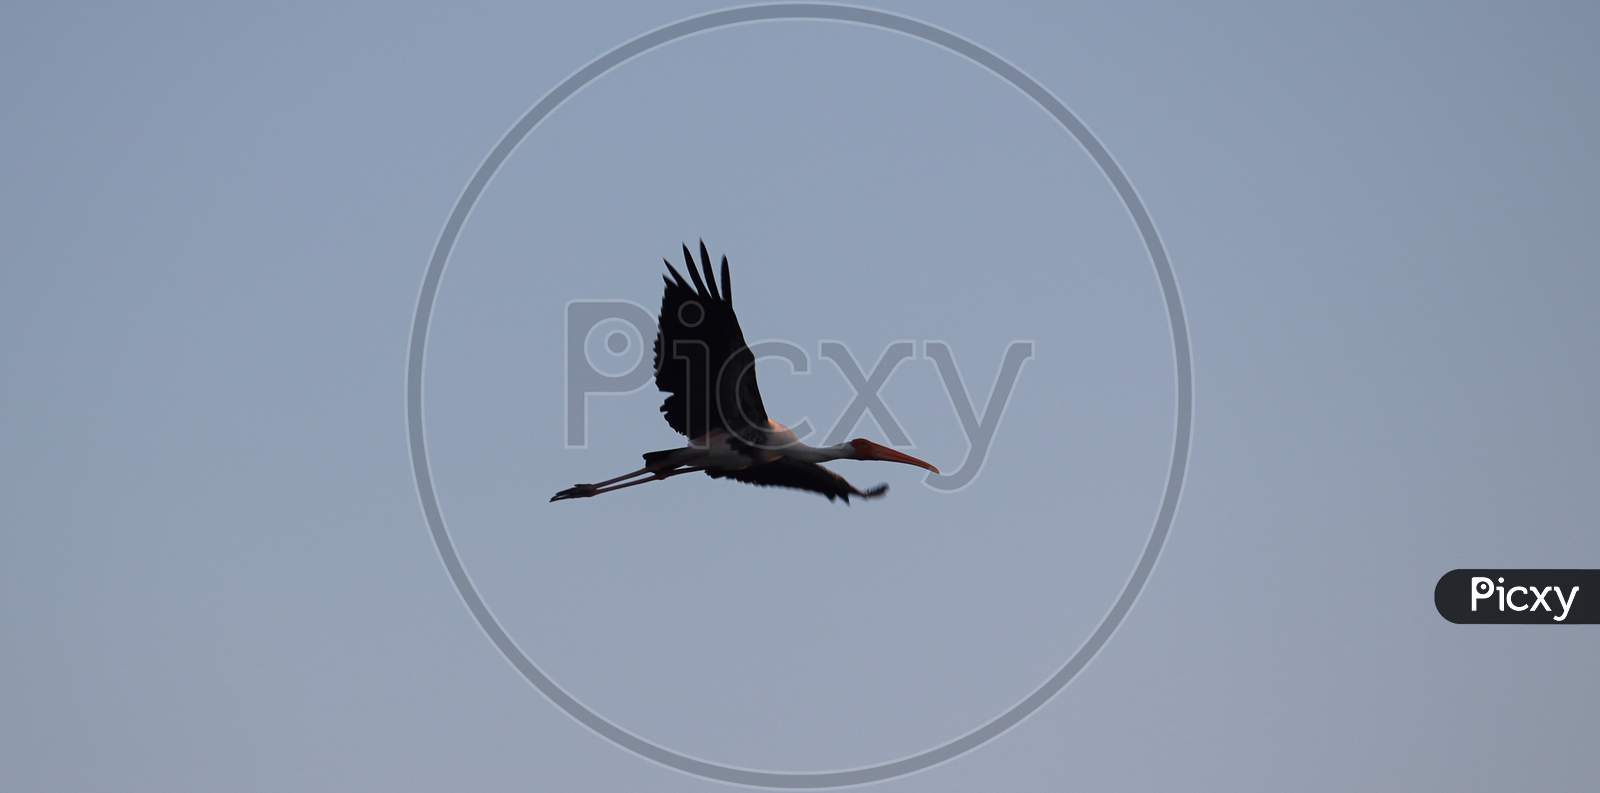 A Stork Bird Flew Into The Sky In The Morning In Search Of Food Before Sunrise